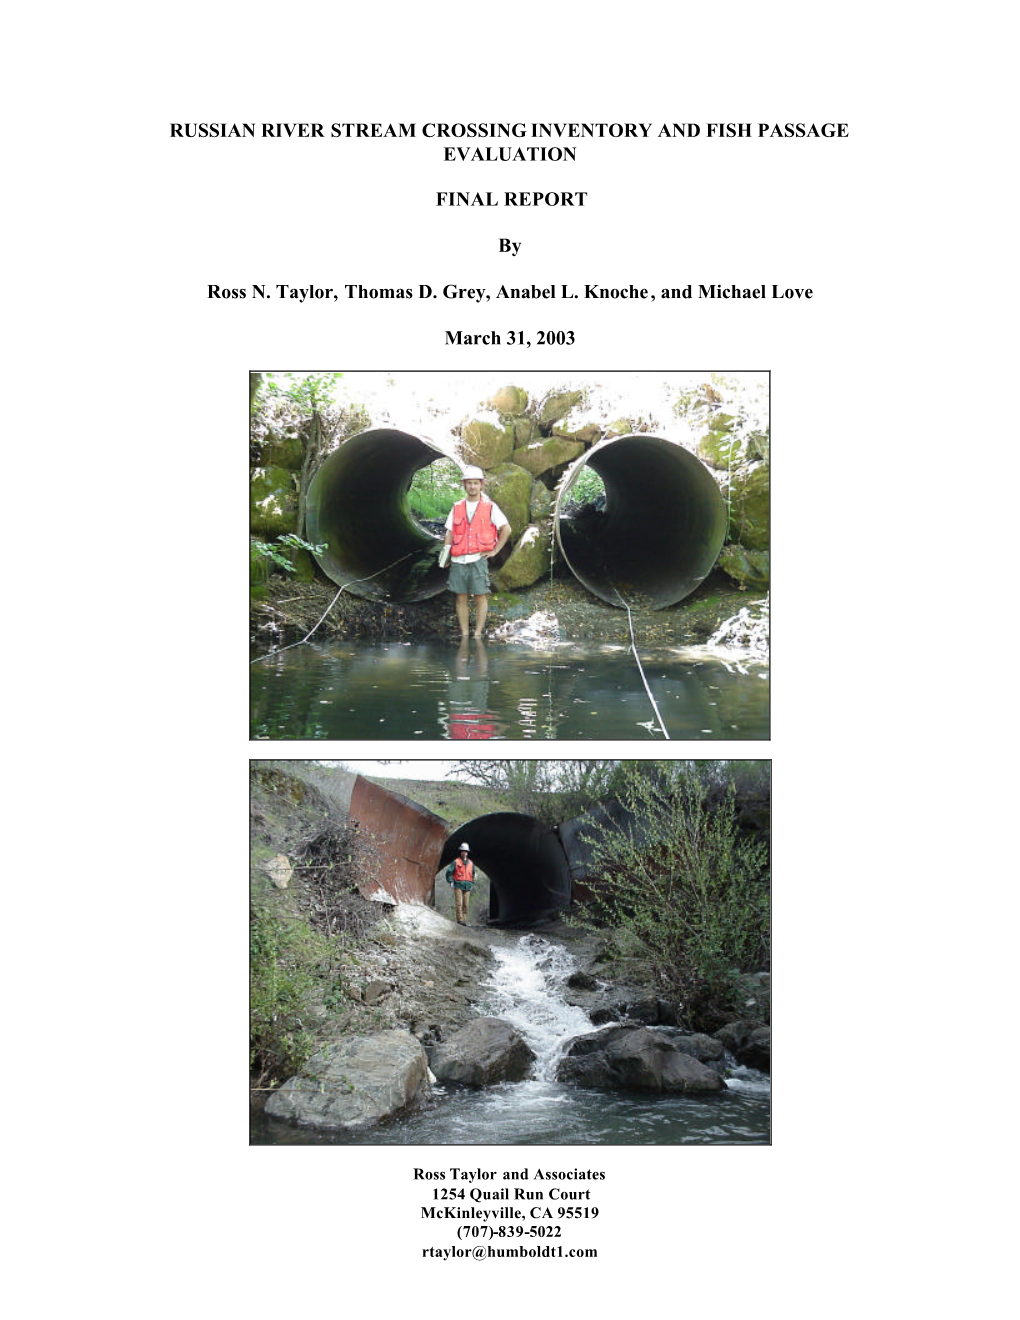 Russian River Stream Crossing Inventory and Fish Passage Evaluation